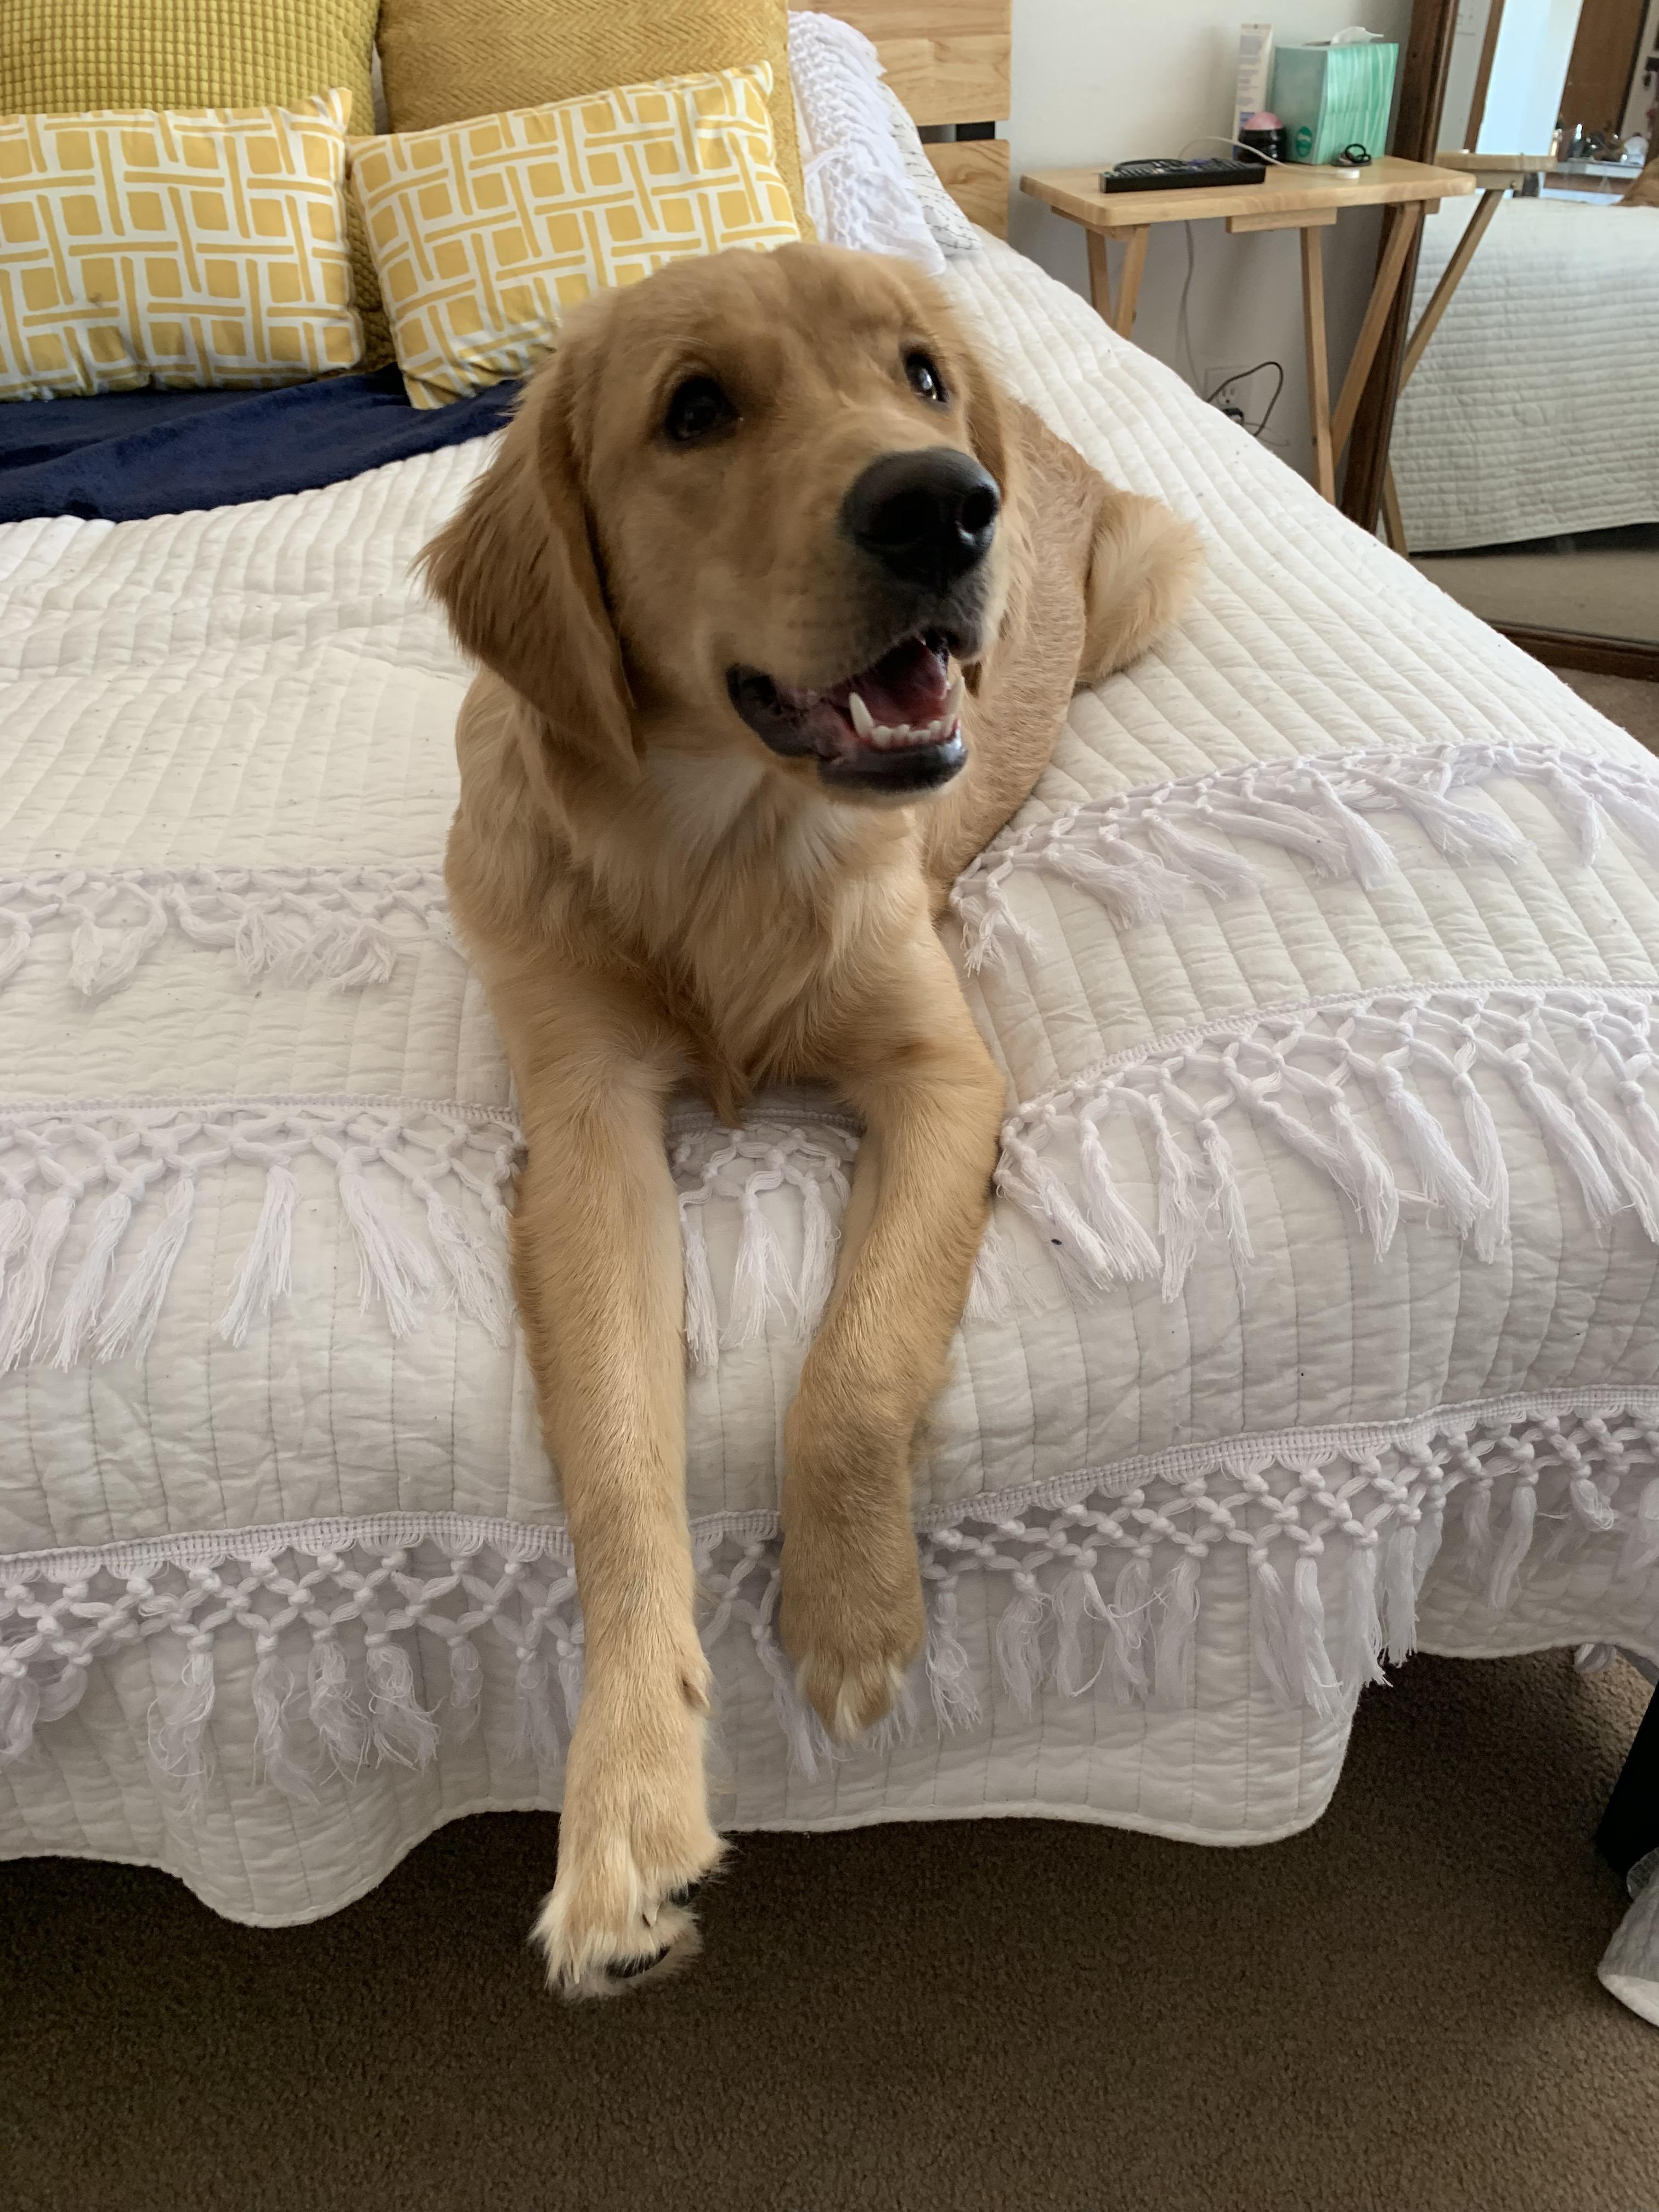 A Golden Retriever lying on the bed while looking up and smiling